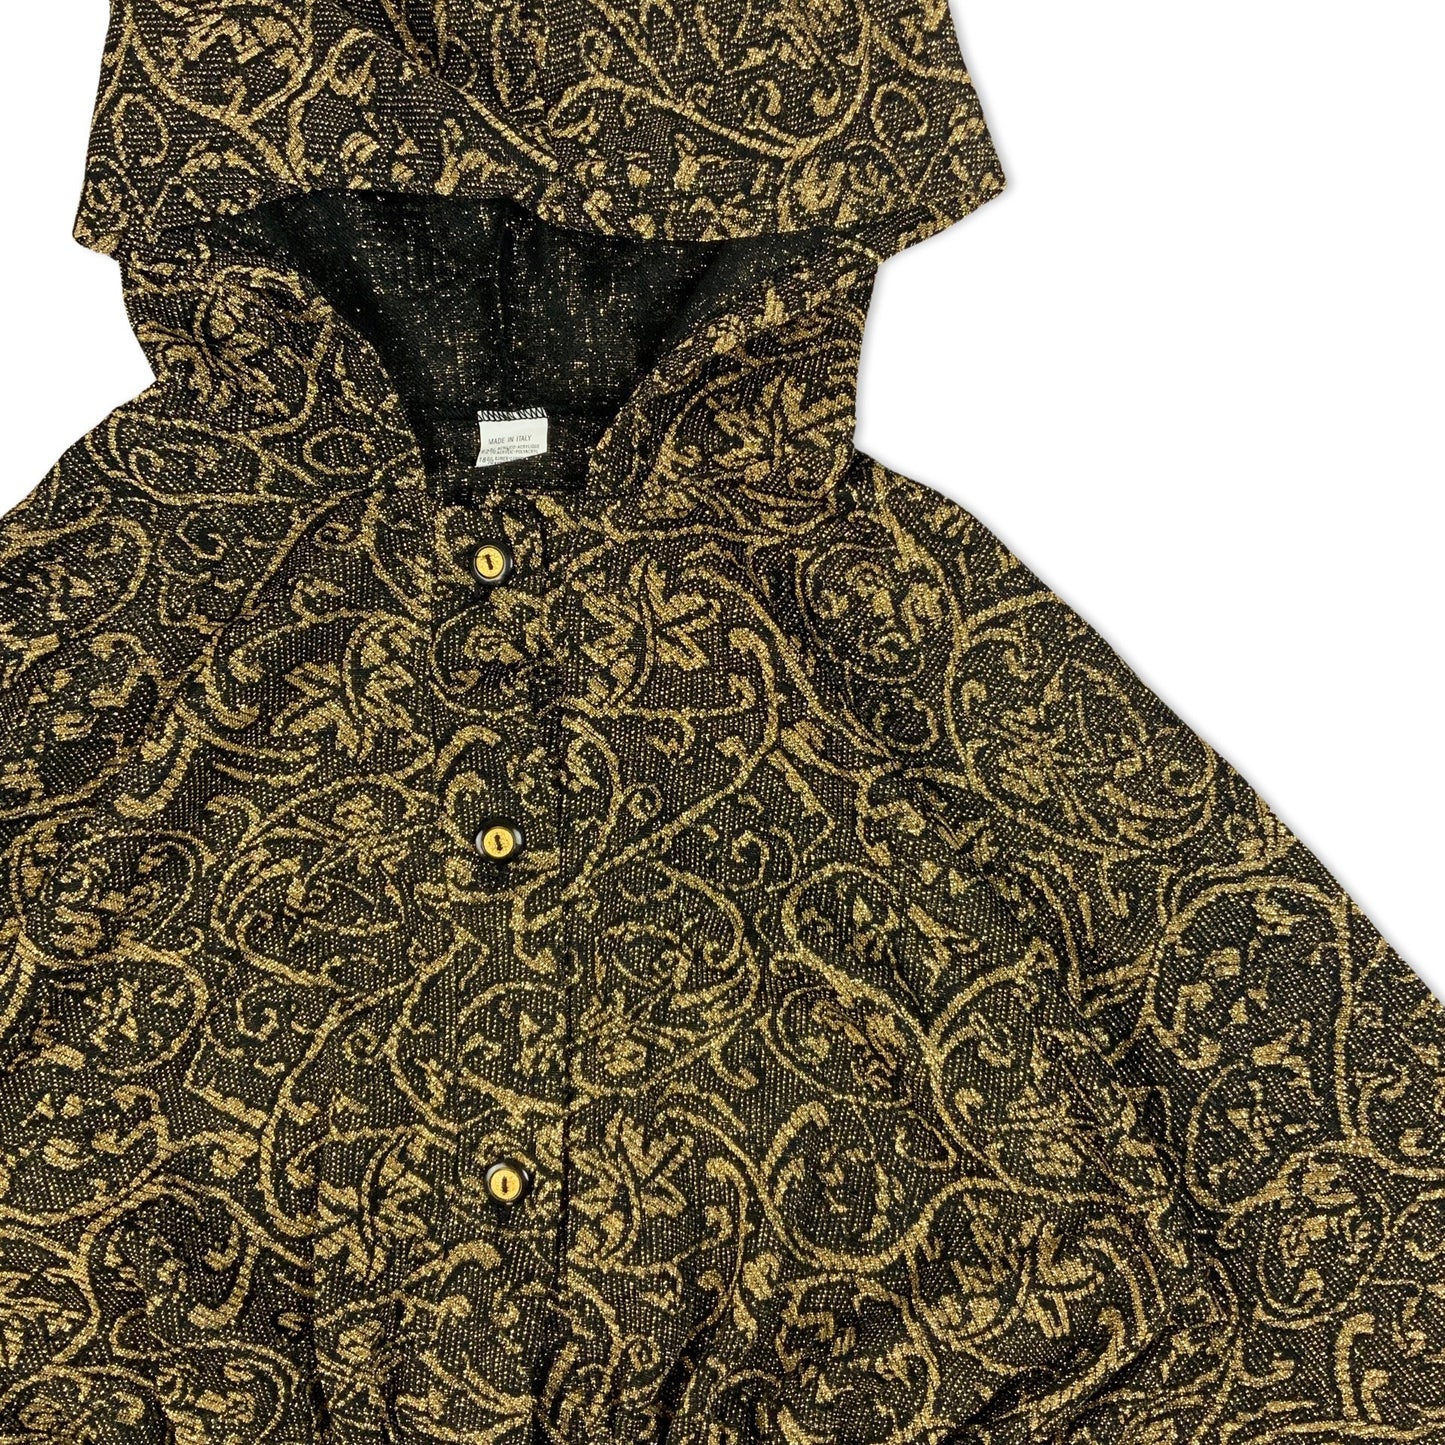 Vintage 80s Black and Gold Lurex Paisley Hooded Blouse 16 18 20